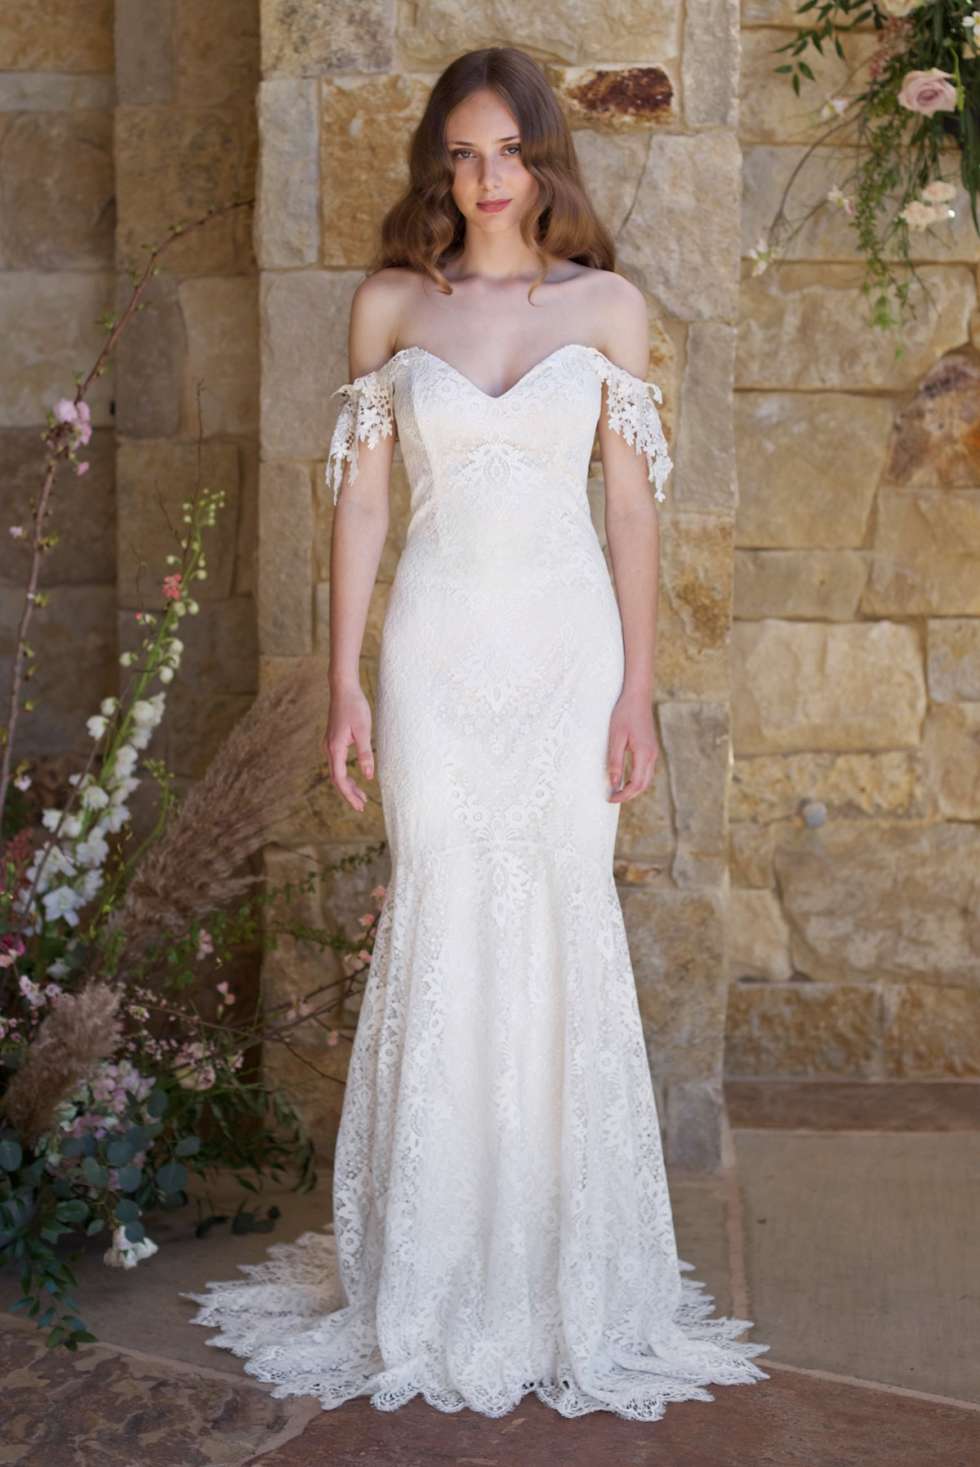 2018 Spring Wedding Dress Collection by Claire Pettibone